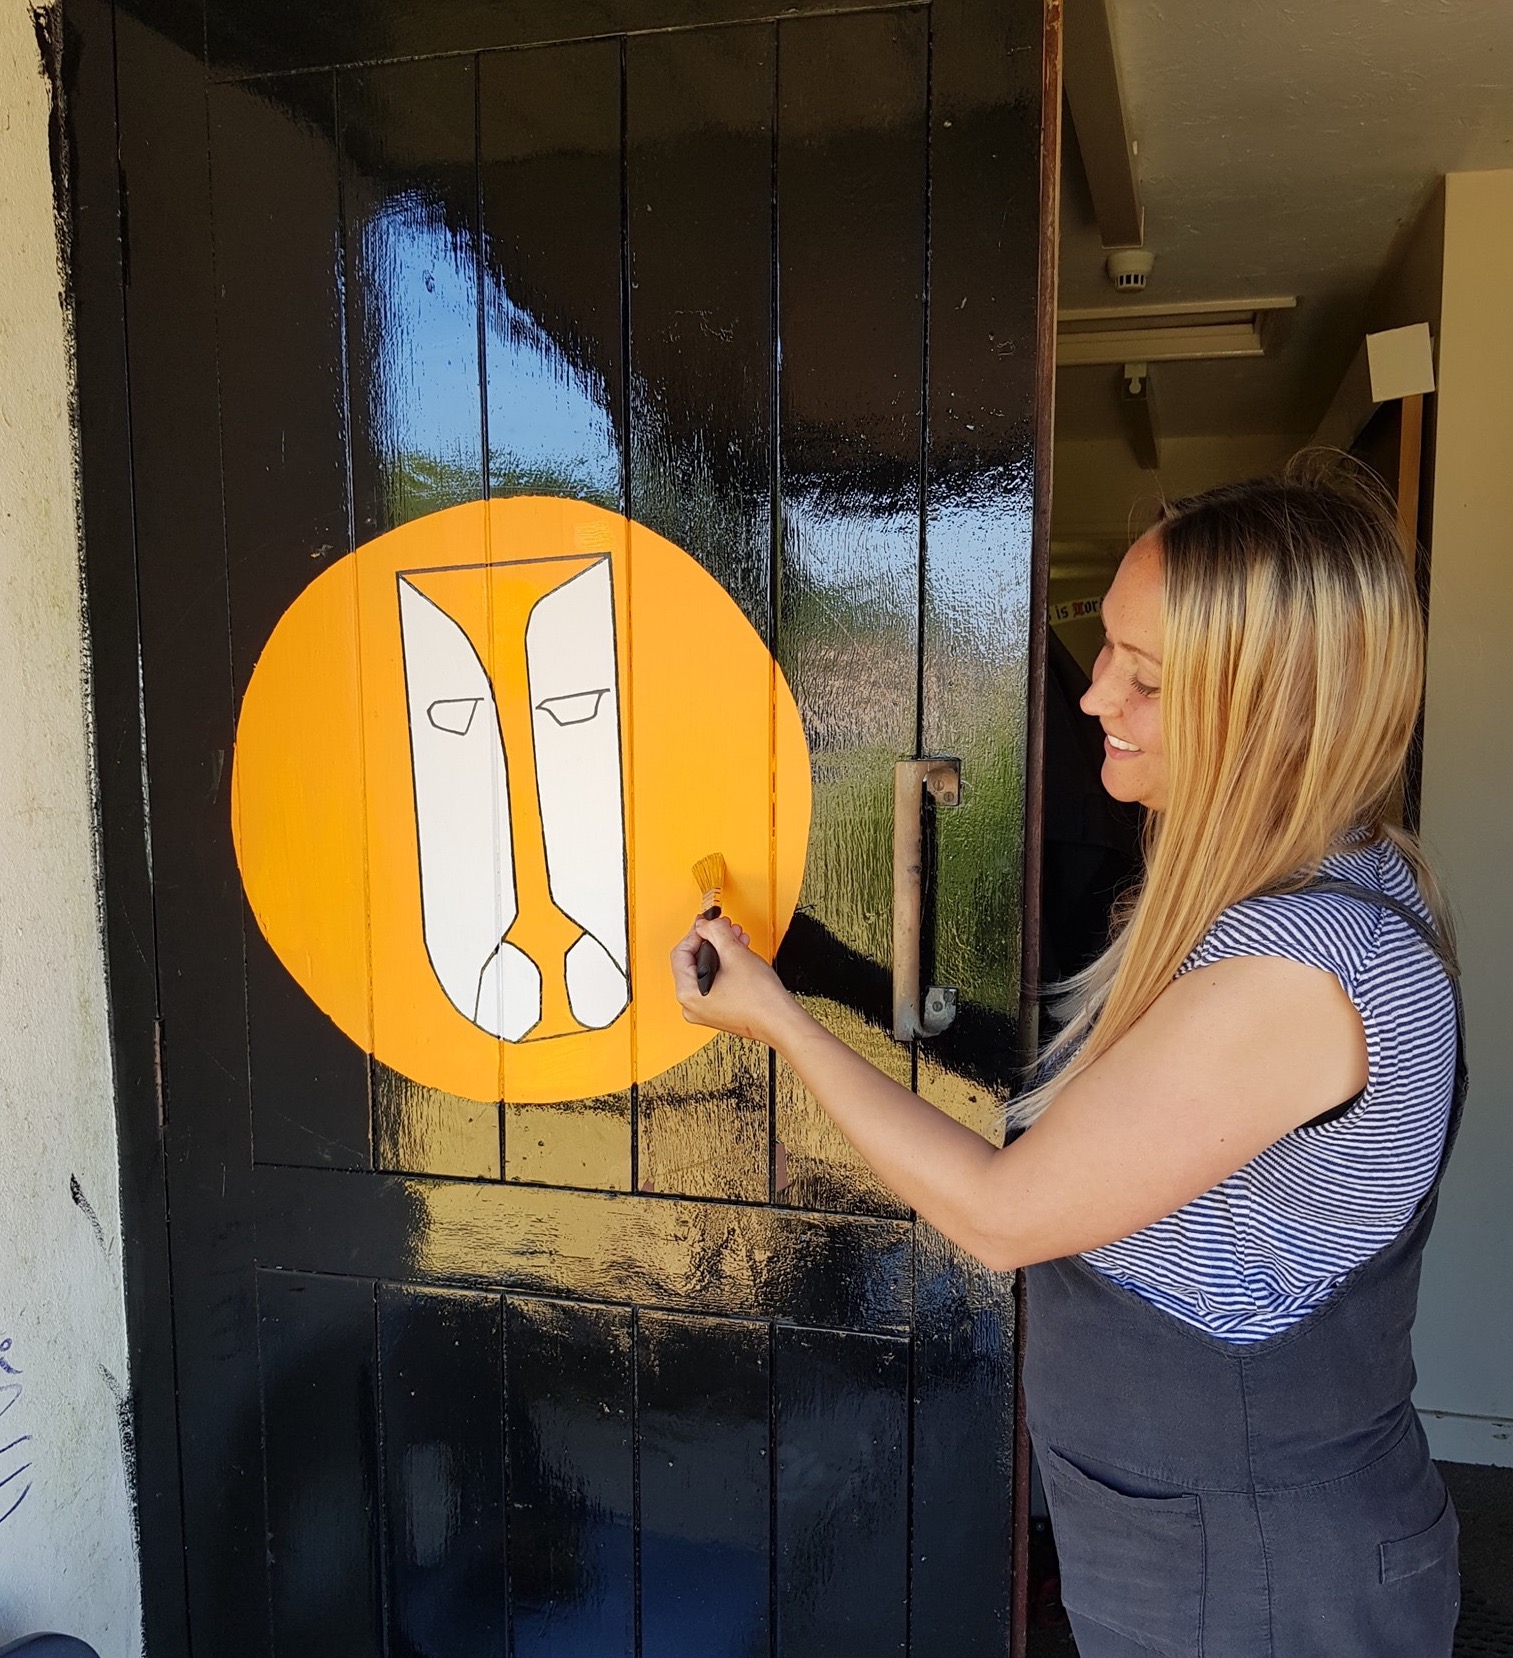 Artist Nicola Parsons painting a yellow sign on a black door